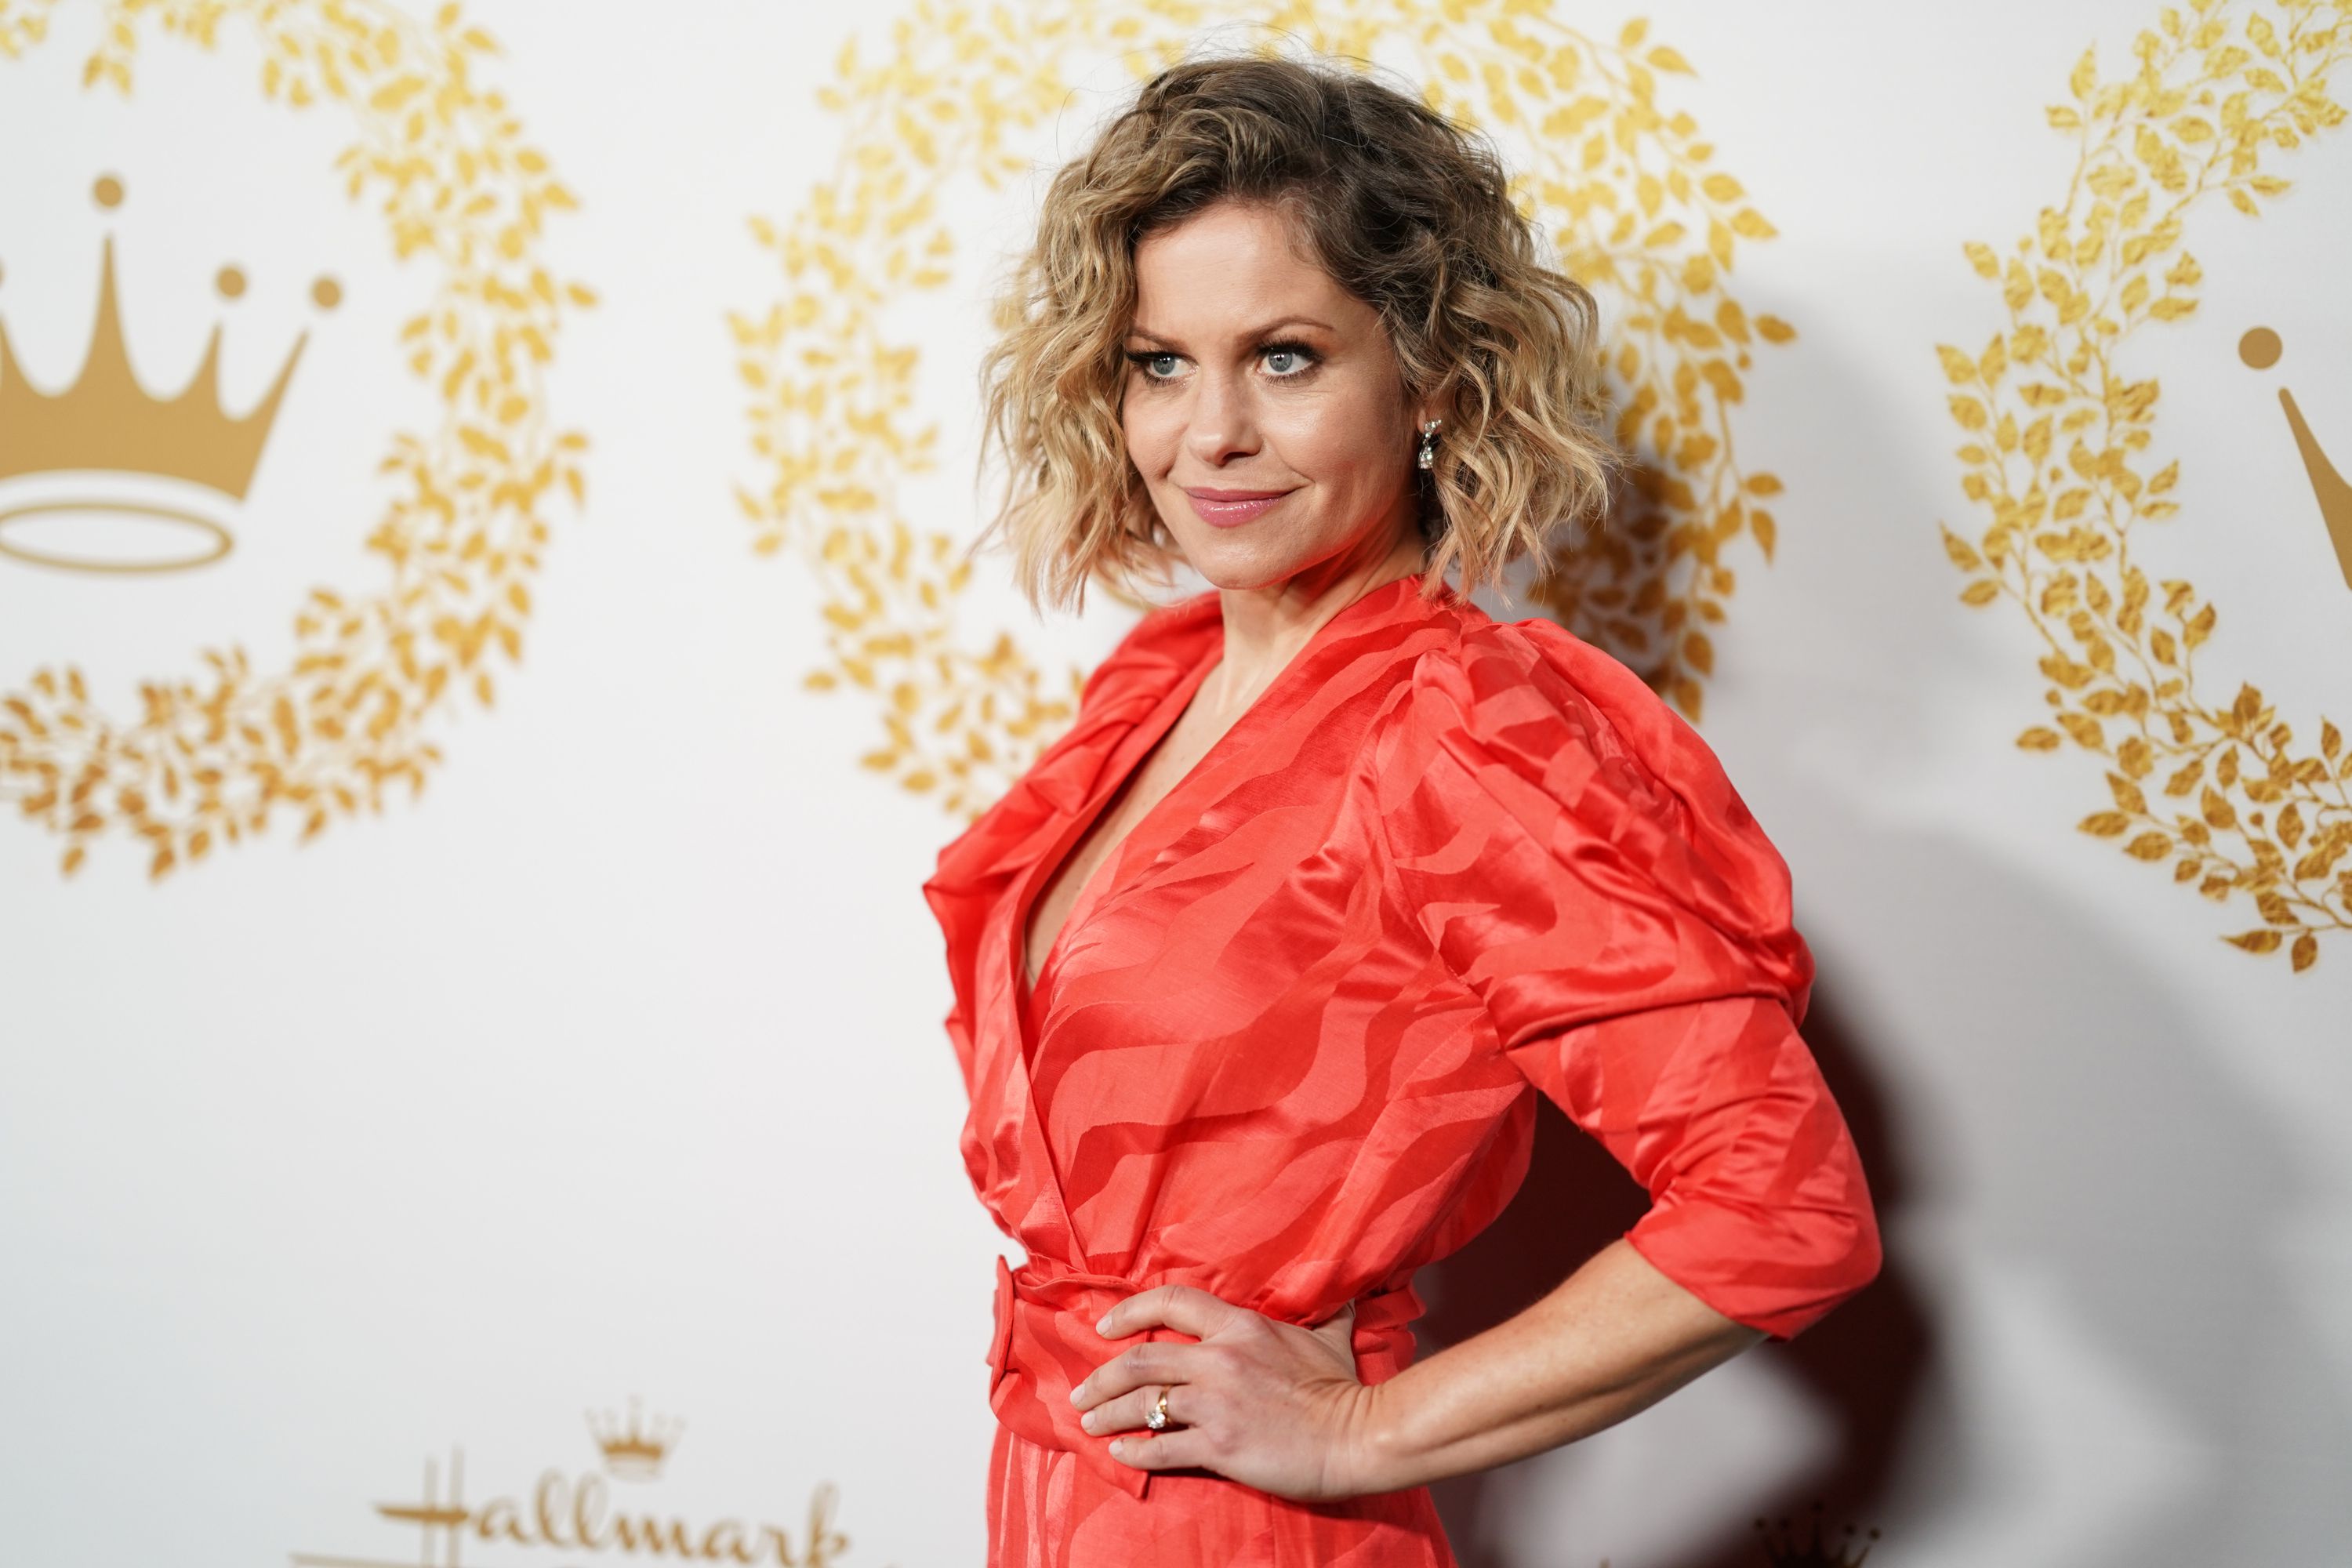 Candace Cameron Bure At The Hallmark Channel And Hallmark Movies And Mysteries 2019 Winter TCA Tour at Tournament House on February 09, 2019 in Pasadena, California | Photo: Getty Images